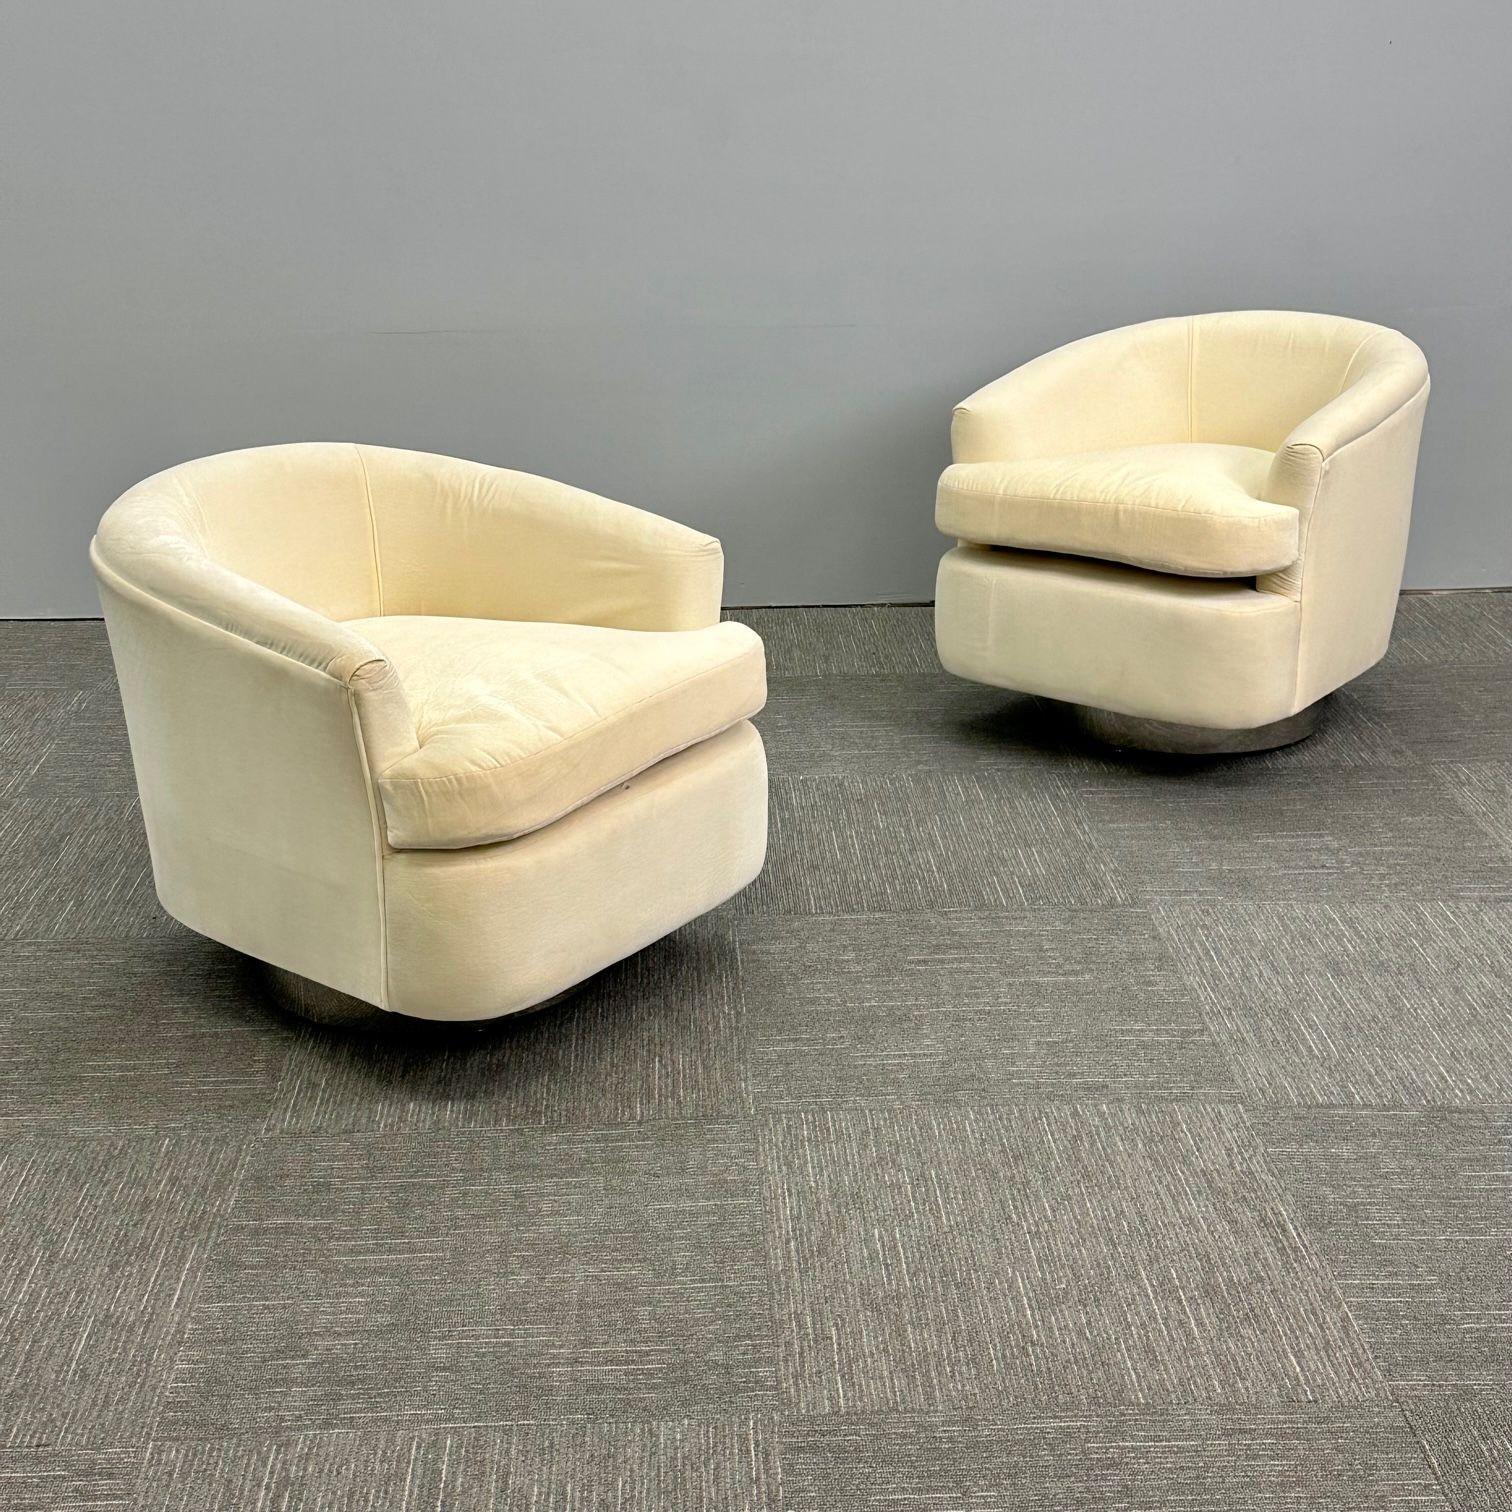 Mid-Century Modern Milo Baughman Style Swivel Chairs, Chrome Base, Cream Mohair
 
Pair of modern Milo Baughman inspired swivel chairs having a chrome finished base and cream mohair upholstery. This chair sits about 3 inches off the ground and has a